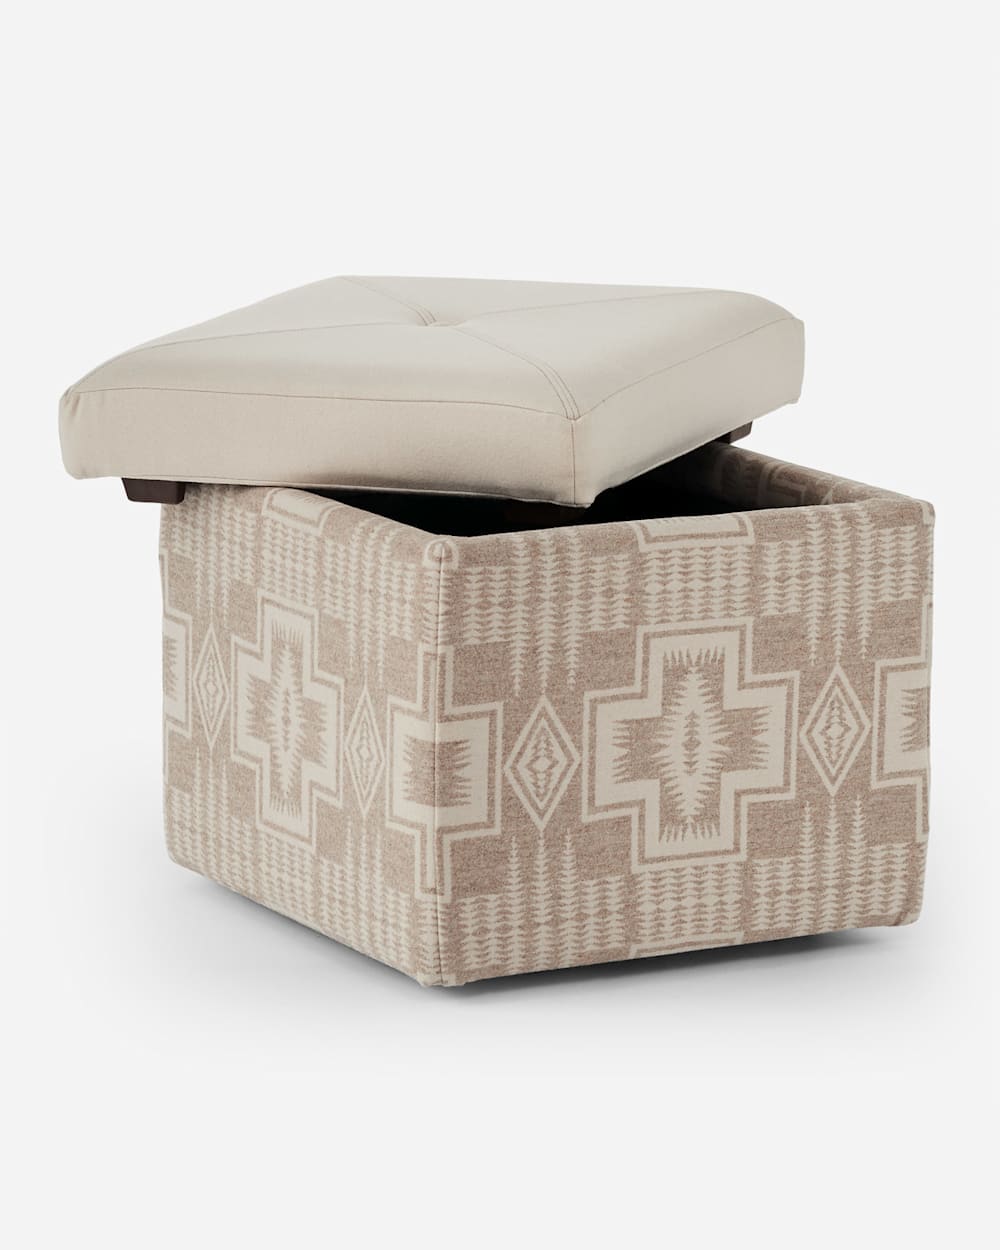 ADDITIONAL VIEW OF FANNIE KAY STORAGE OTTOMAN IN HARDING NATURAL/DOE image number 2